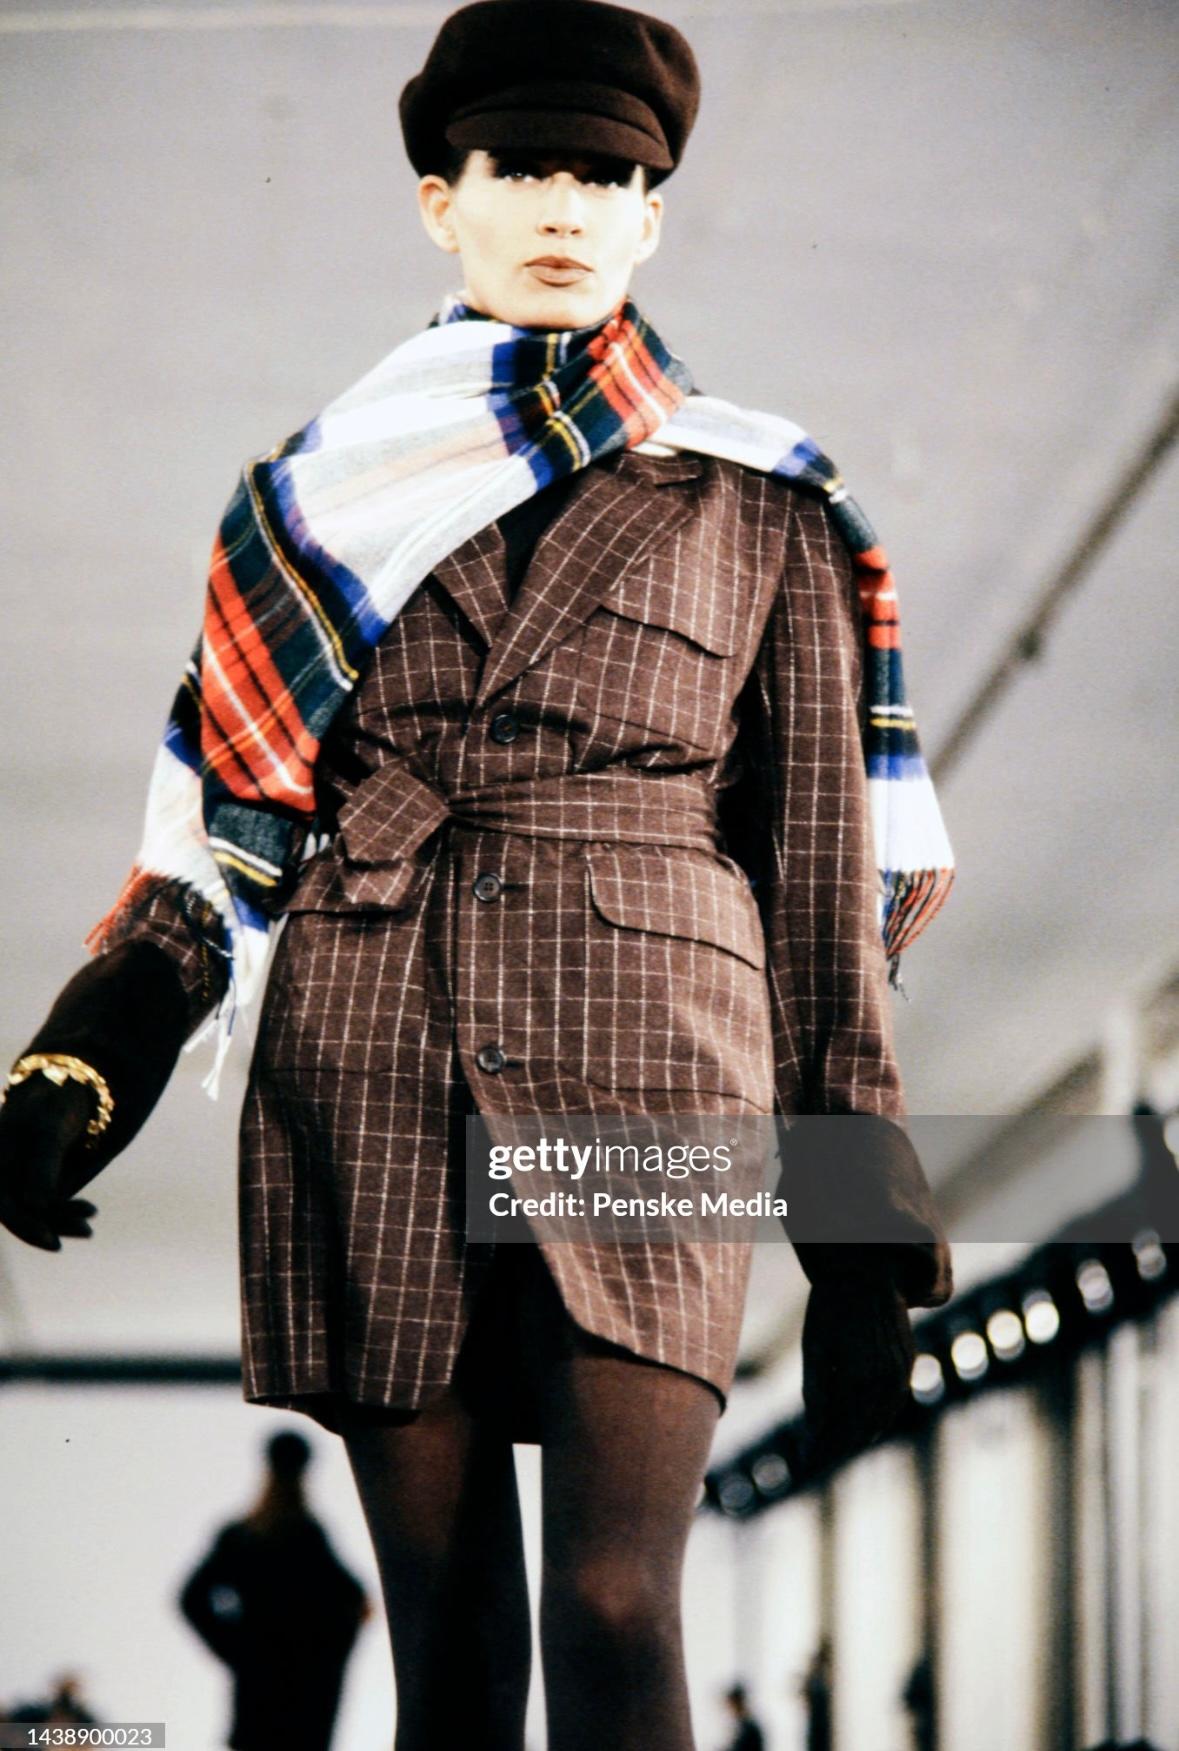 Presenting a fabulous brown window pane Issac Mizrahi blazer mini dress. From the Fall/Winter 1991 collection, this suiting-inspired coat / mini dress debuted on the season's runway and features elements of a classic men's suit. This chic piece